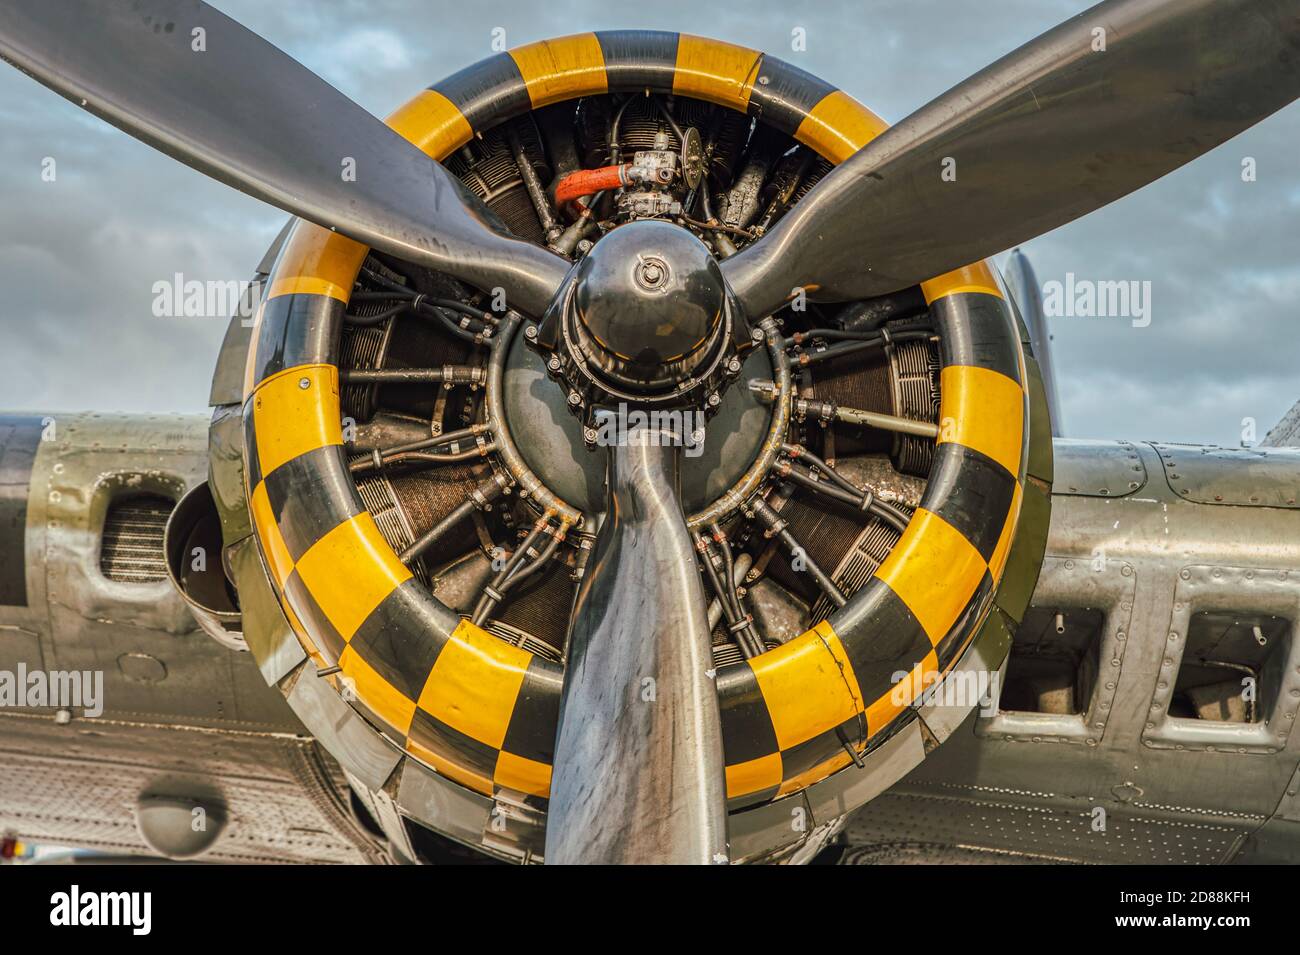 9 cylinder combustion engine with yellow, black square pattern. Nine chamber, air cooled radial motor with propeller closeup on heavy military bomber Stock Photo